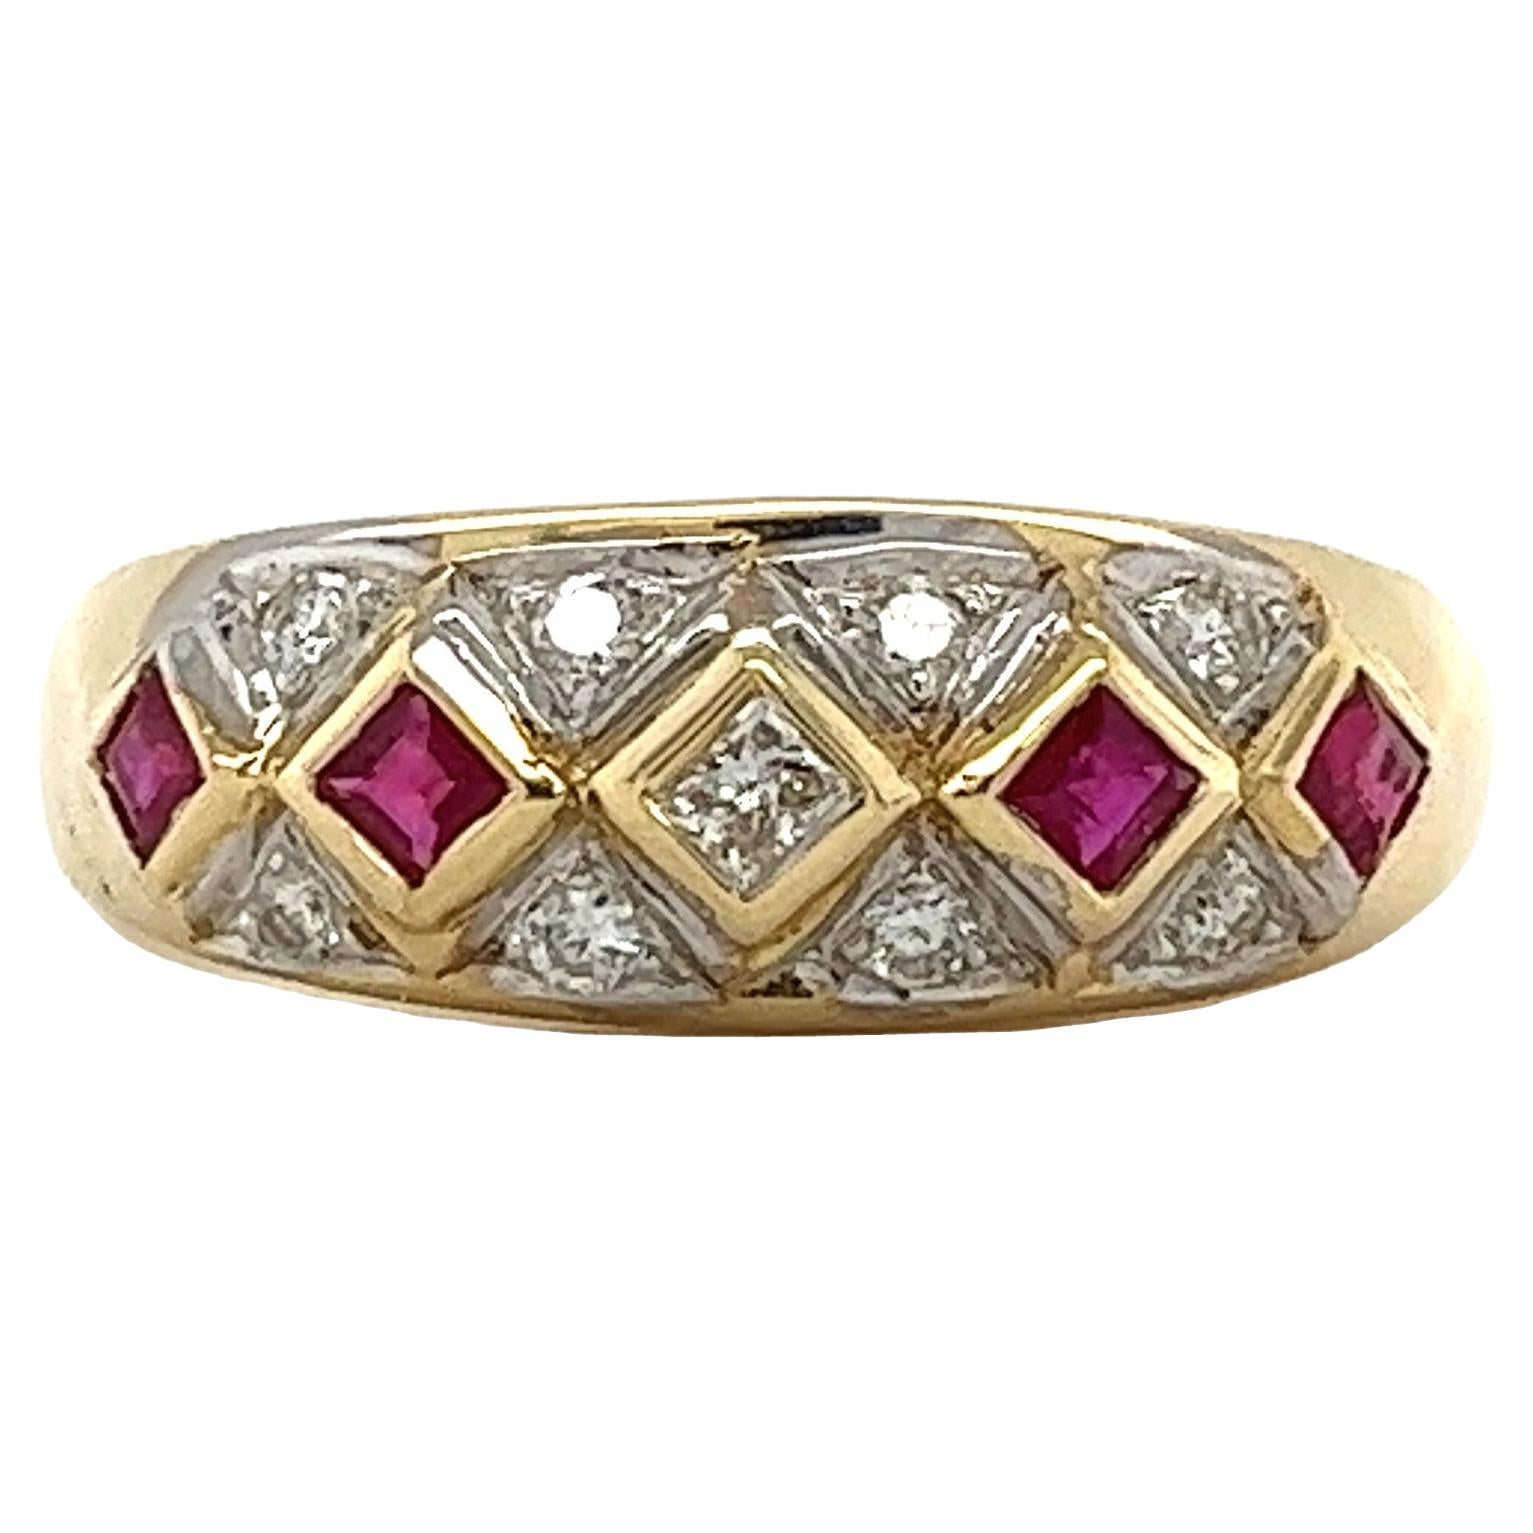 Princess Square Cut Ruby and Diamond Art Deco Style Ring in 14k Gold